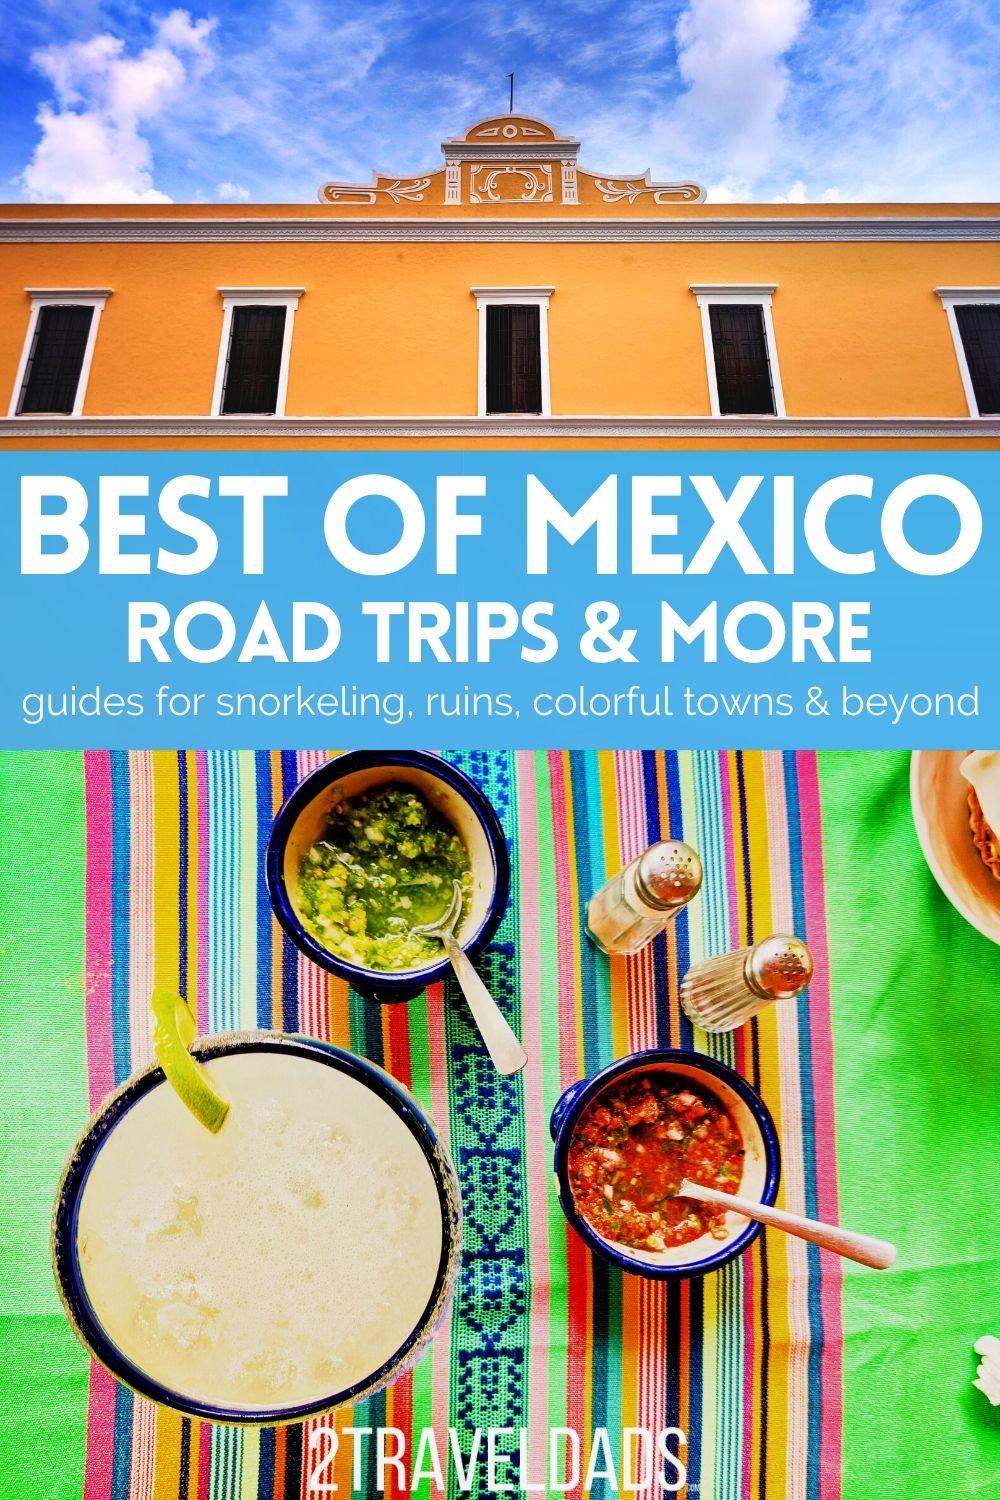 Mexico travel plans and activities for every pace and budget. From hotels on the beach to swimming in the jungle, Mexican vacation destinations from Cancun to Cabo San Lucas.